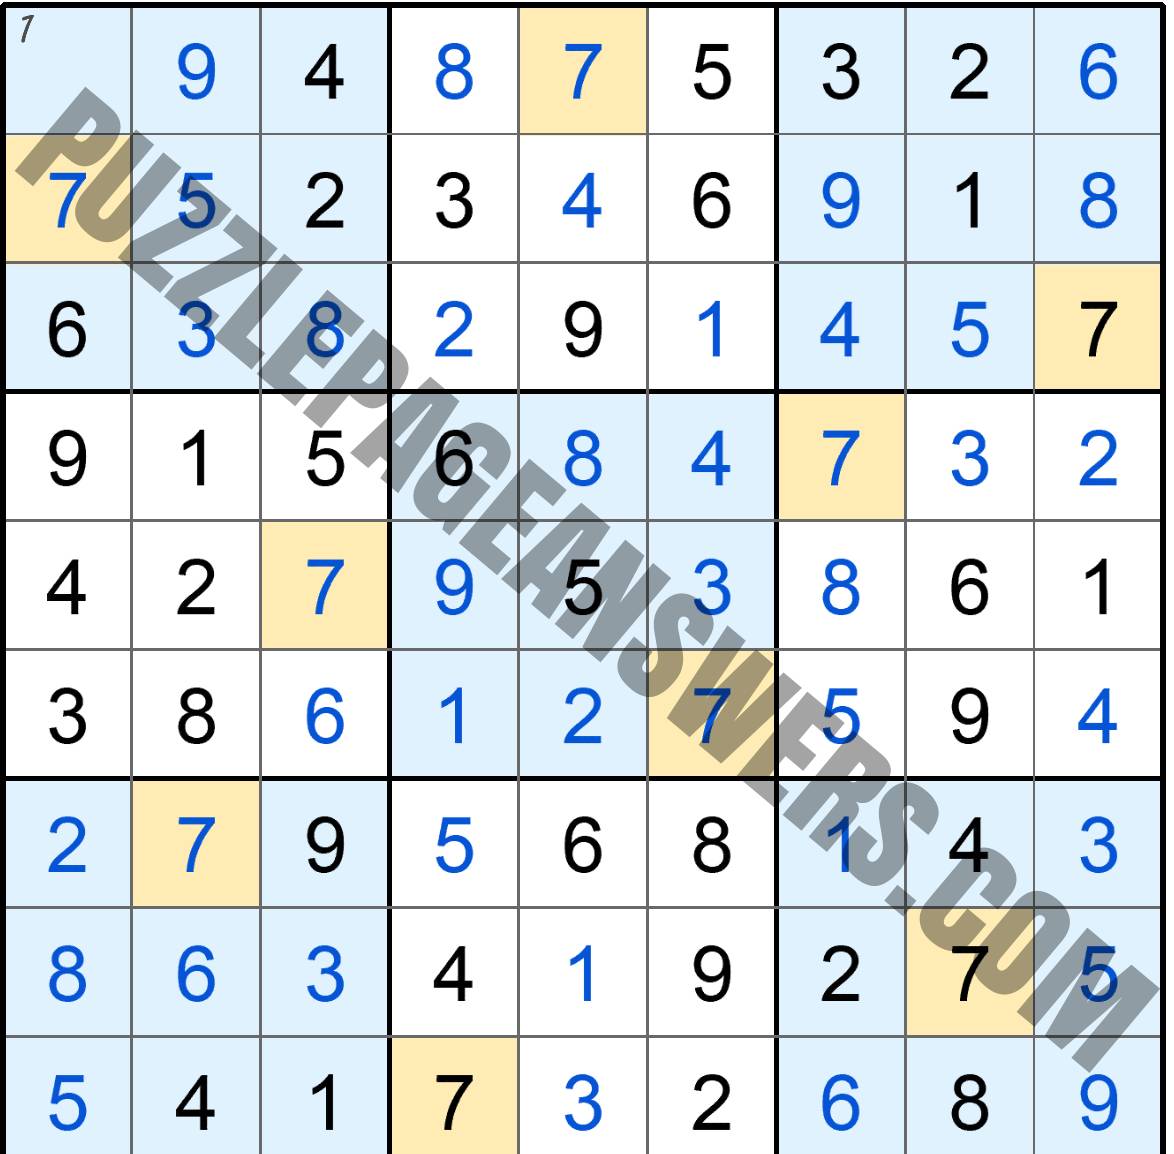 Puzzle Page Sudoku August 12 2021 Answers PuzzlePageAnswers com